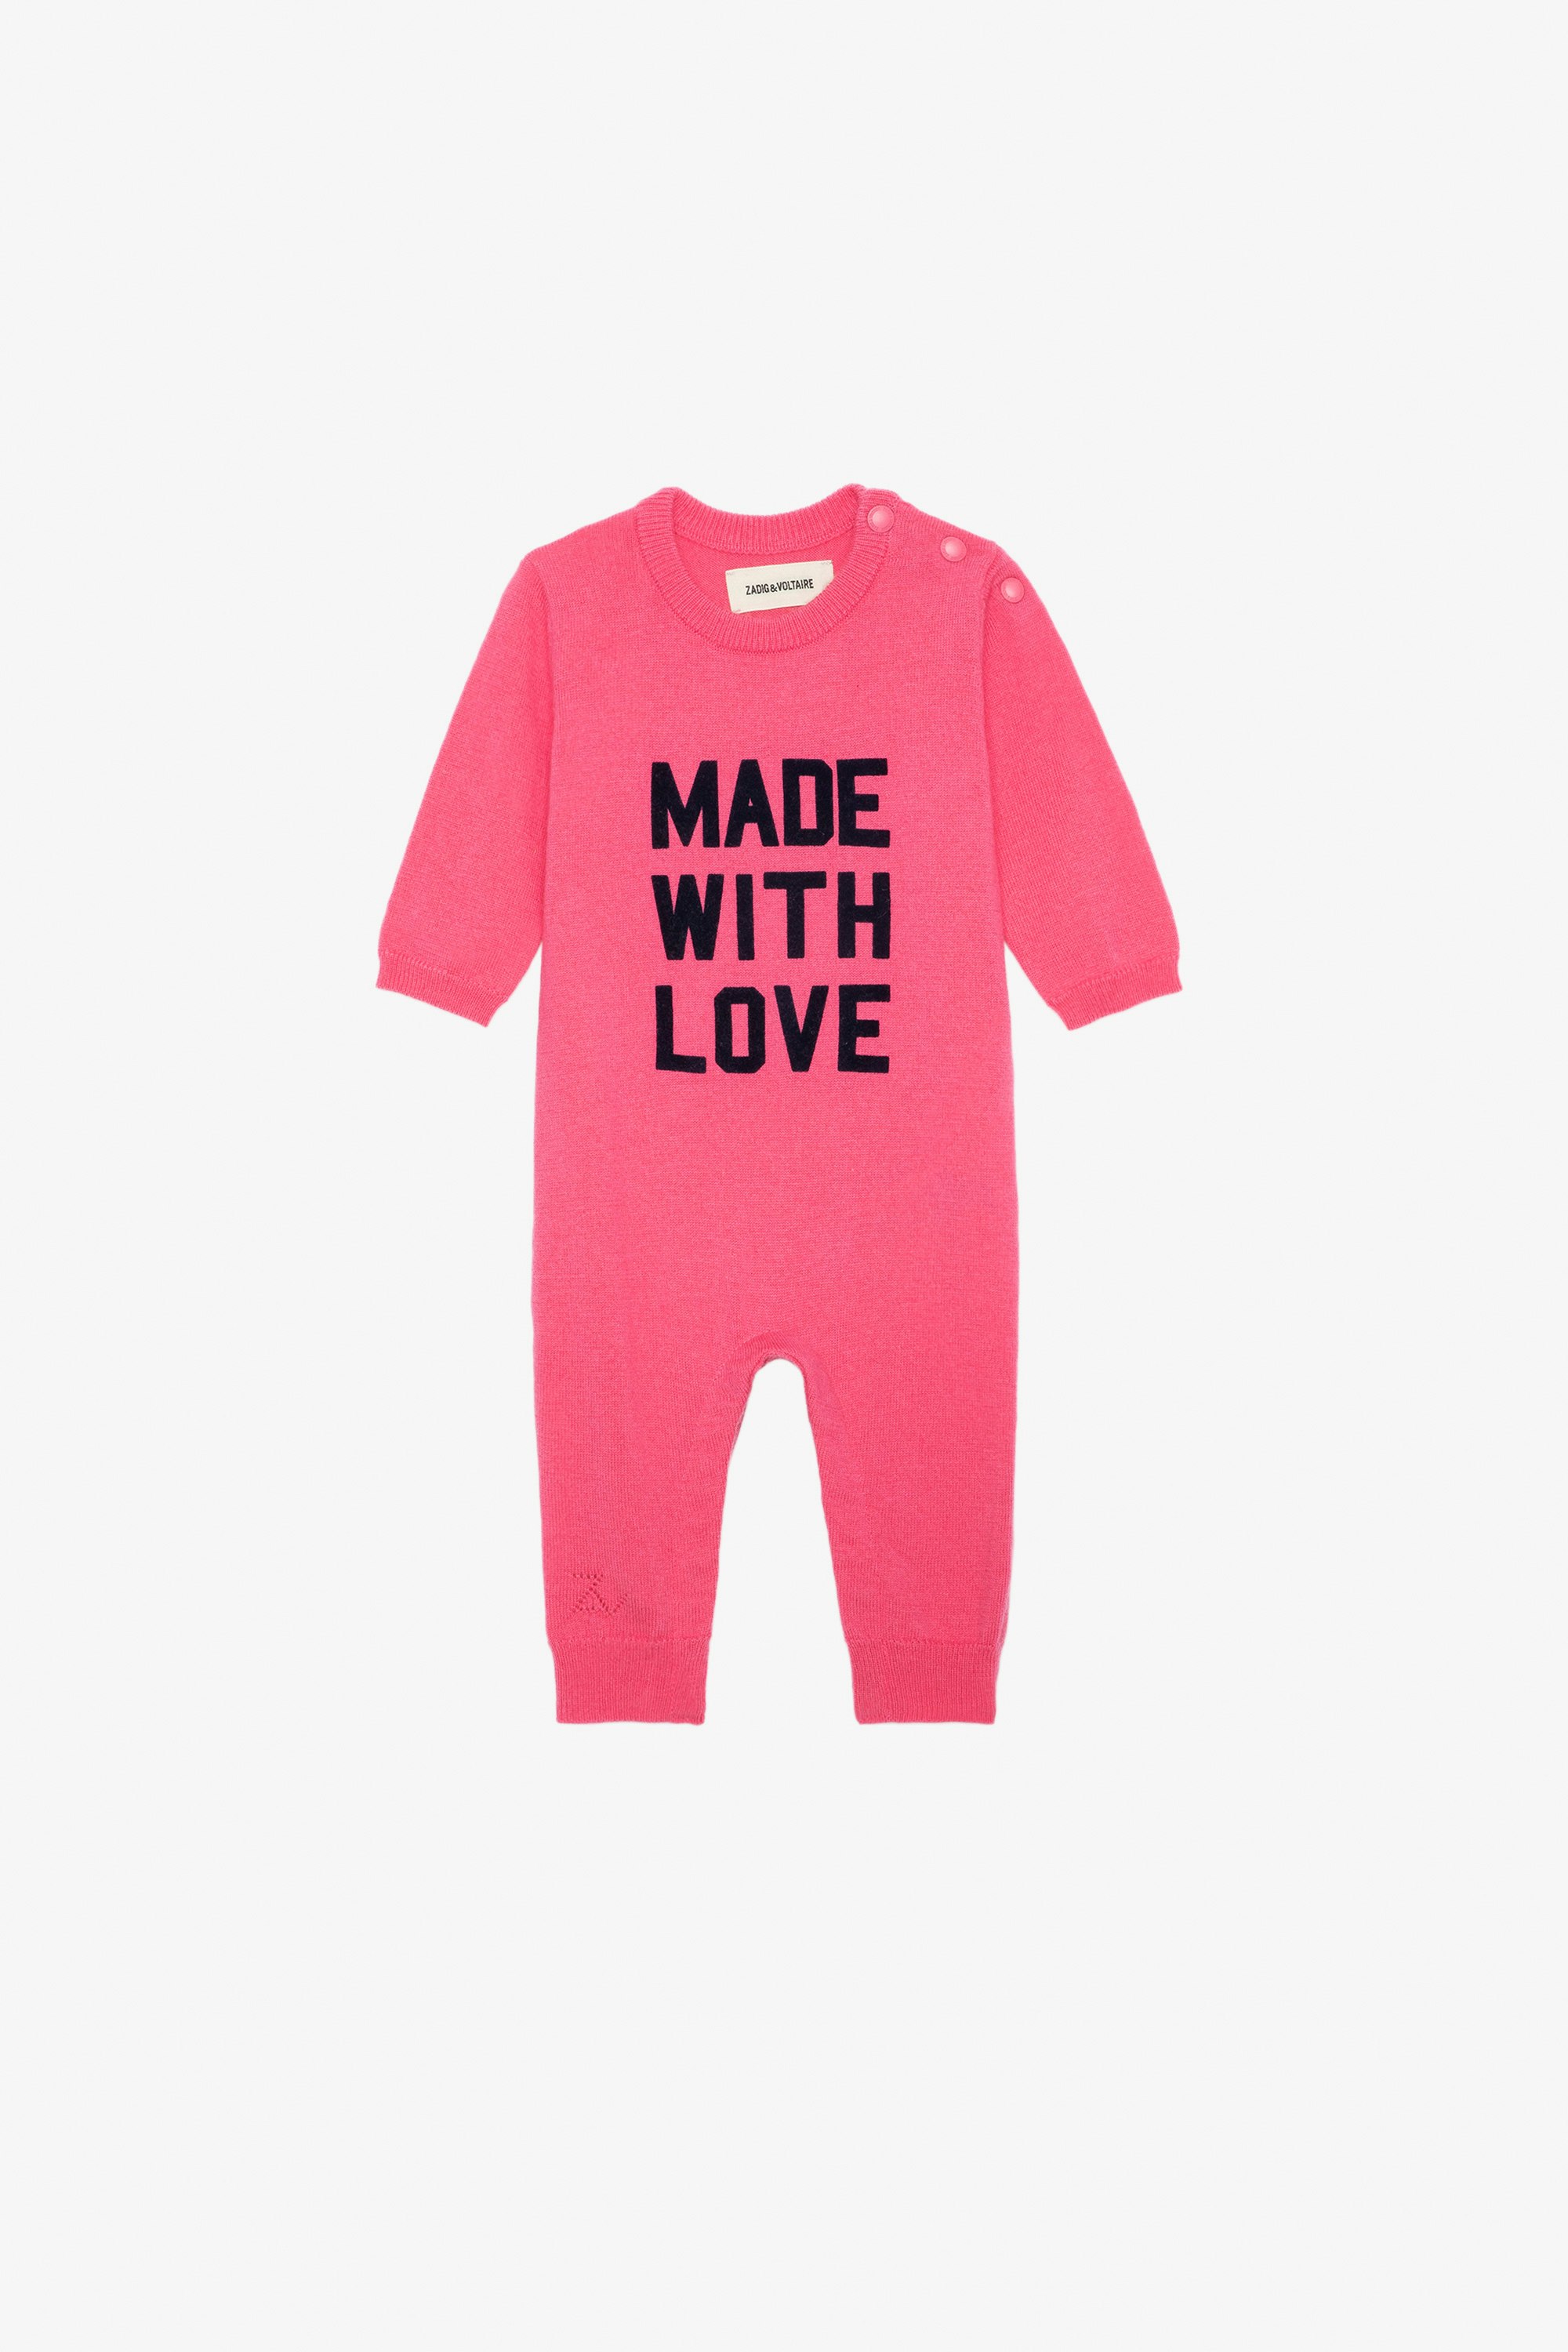 Didou Baby Sleepsuit - Pink knit baby sleepsuit with “Made With Love” slogan.